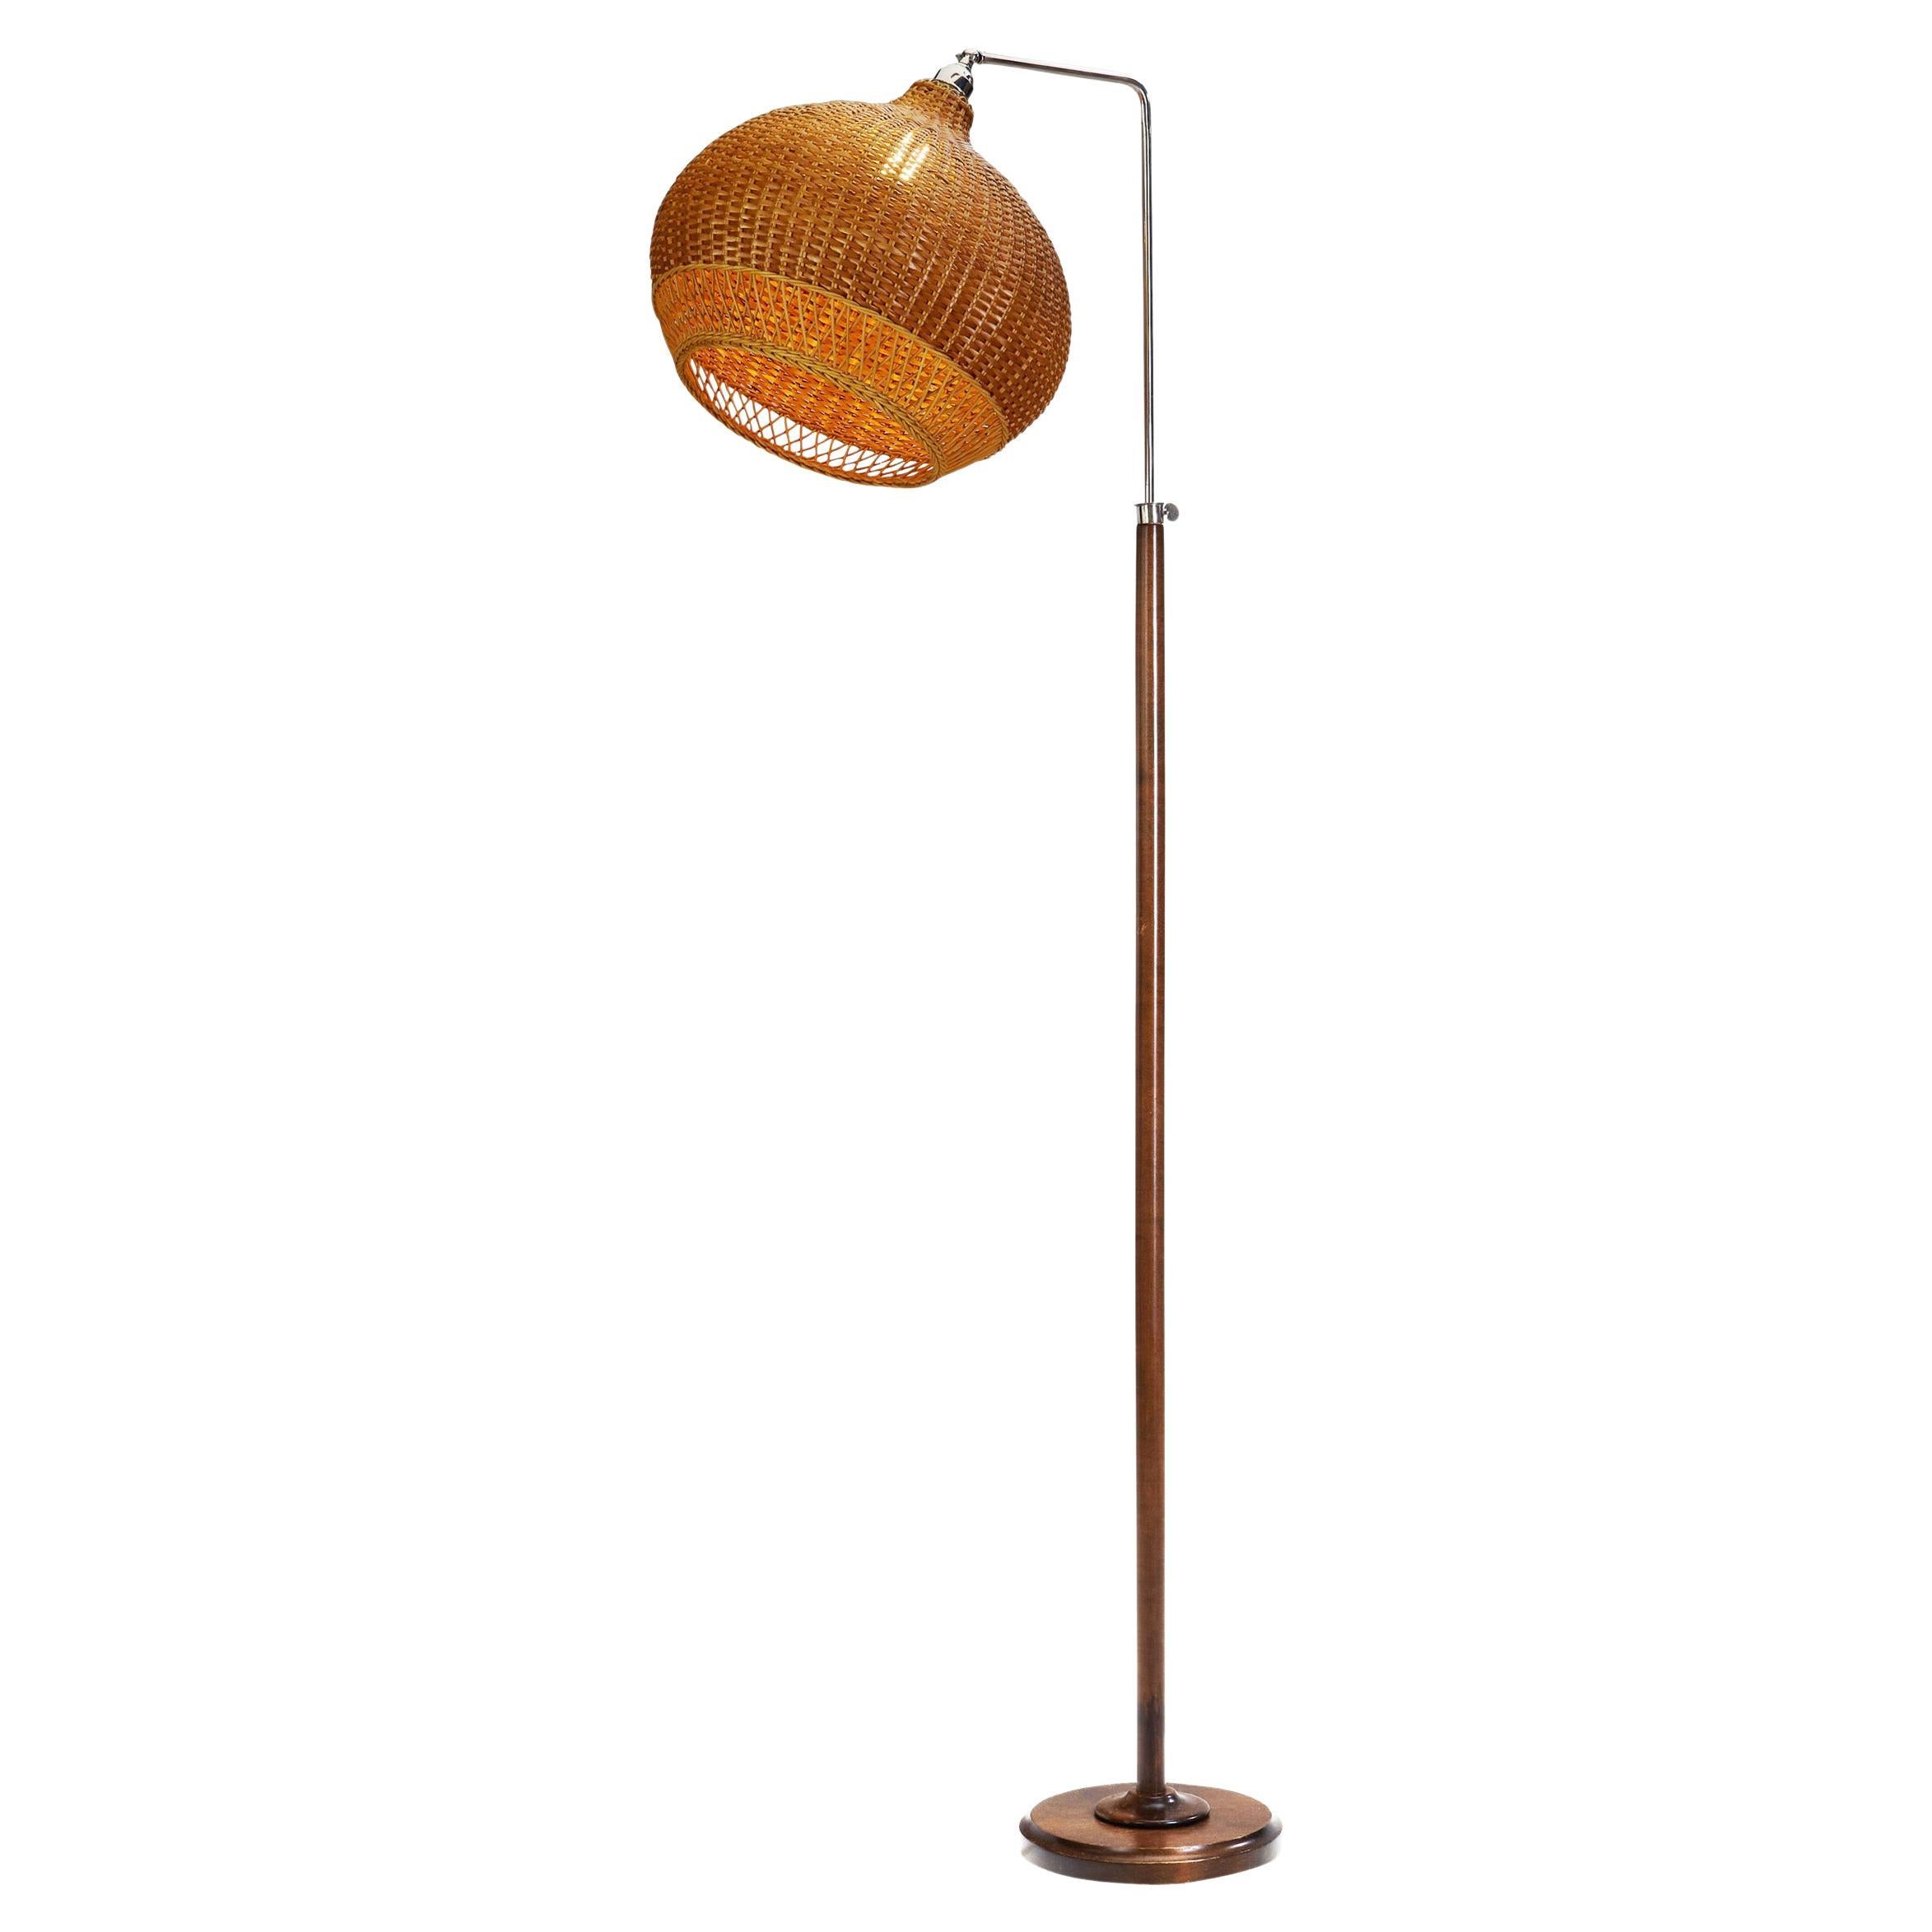 Model "60442" Floor Lamp with Rattan Lampshade by Idman Oy, Finland 1940s